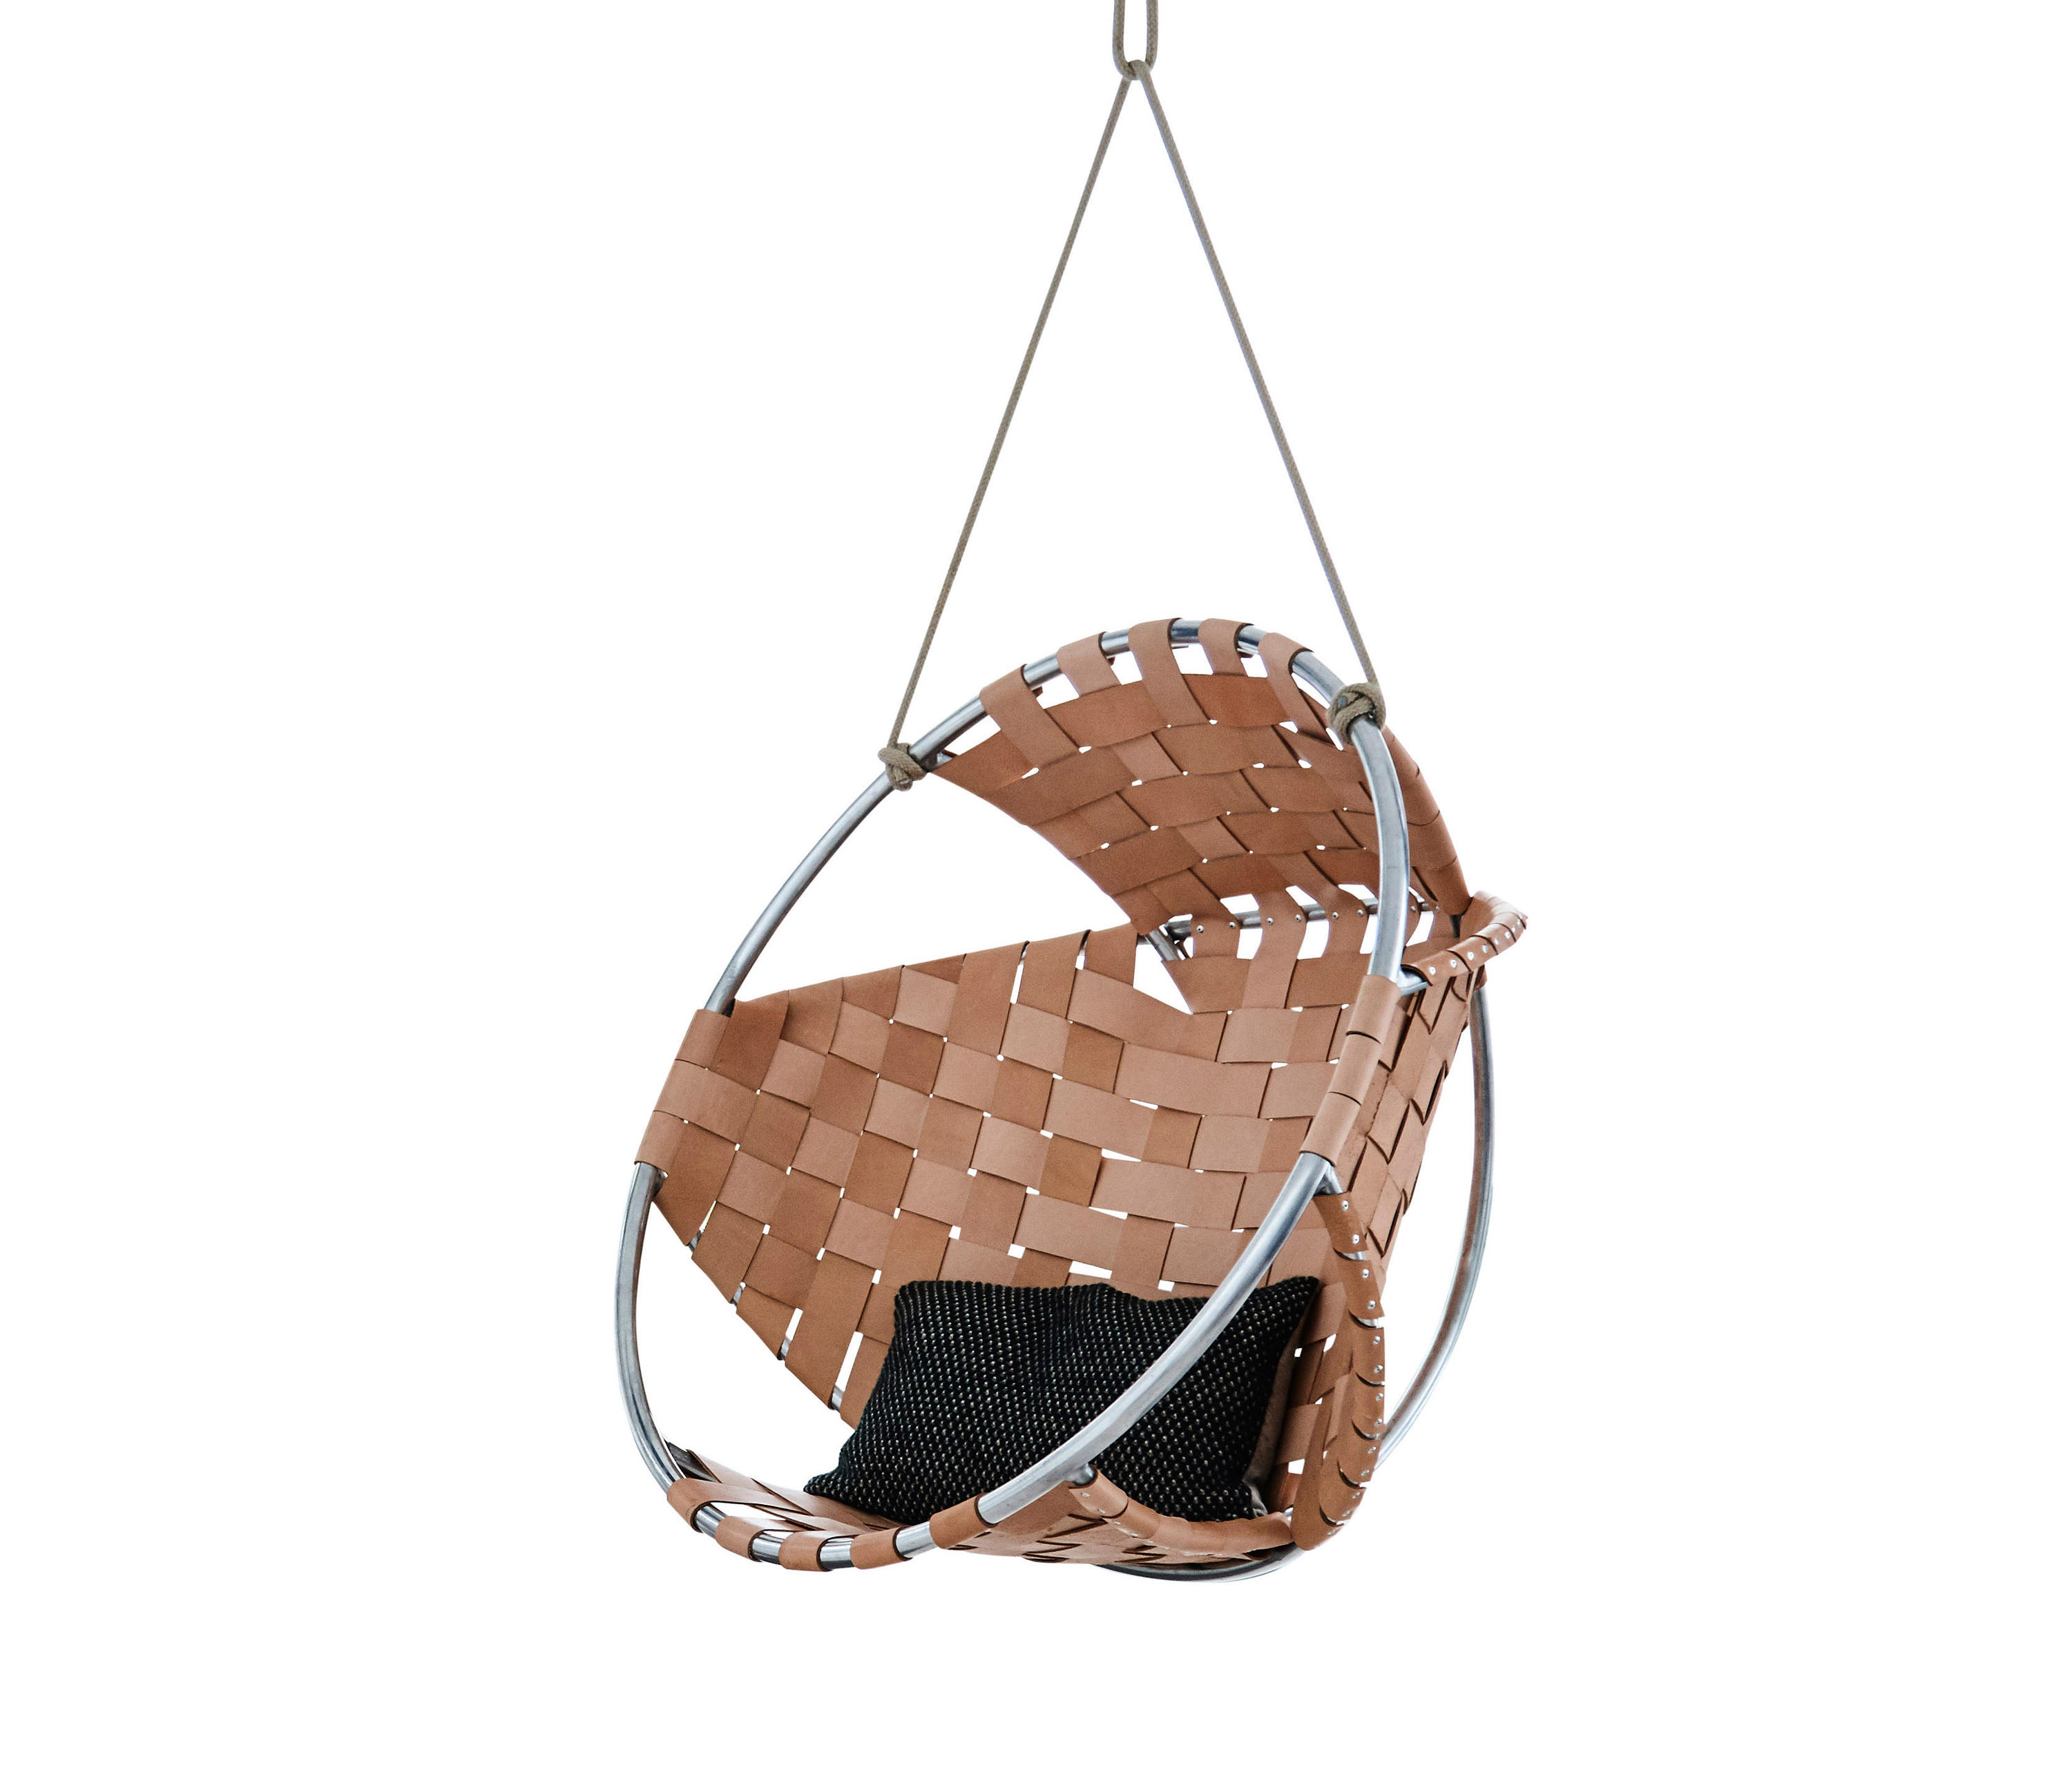 Cocoon Hang Chair Leather Architonic